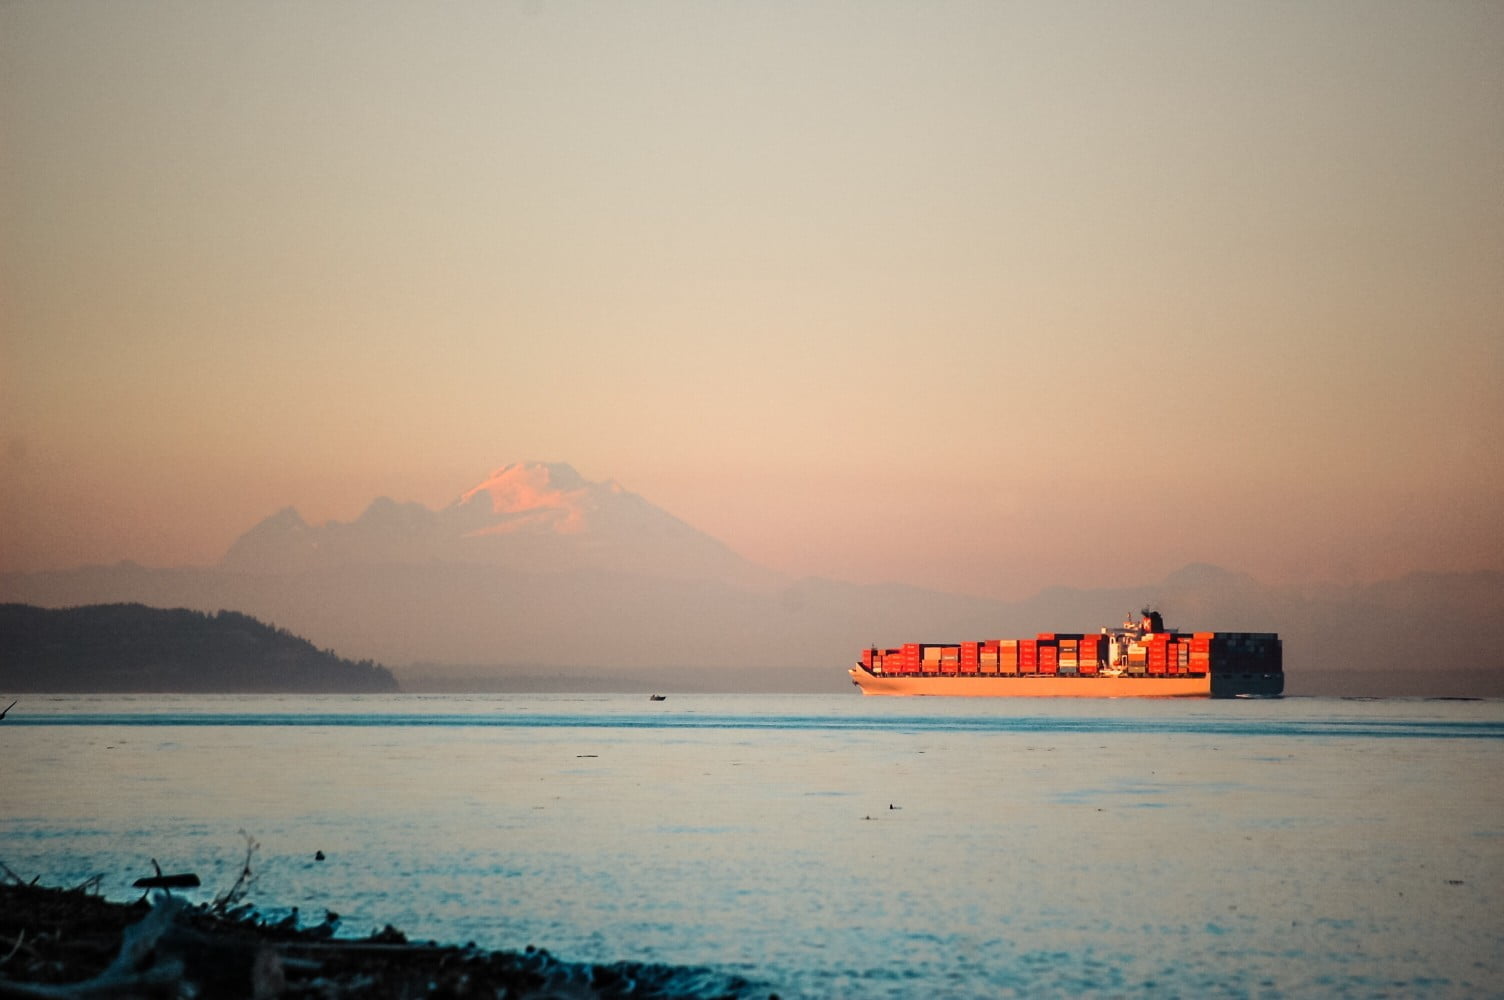 containers shipping containers in the puget sound in seattle washington t20 PQgQ9Q How Floating Battery Buoys Could Curb Shipping Emissions in Ports.